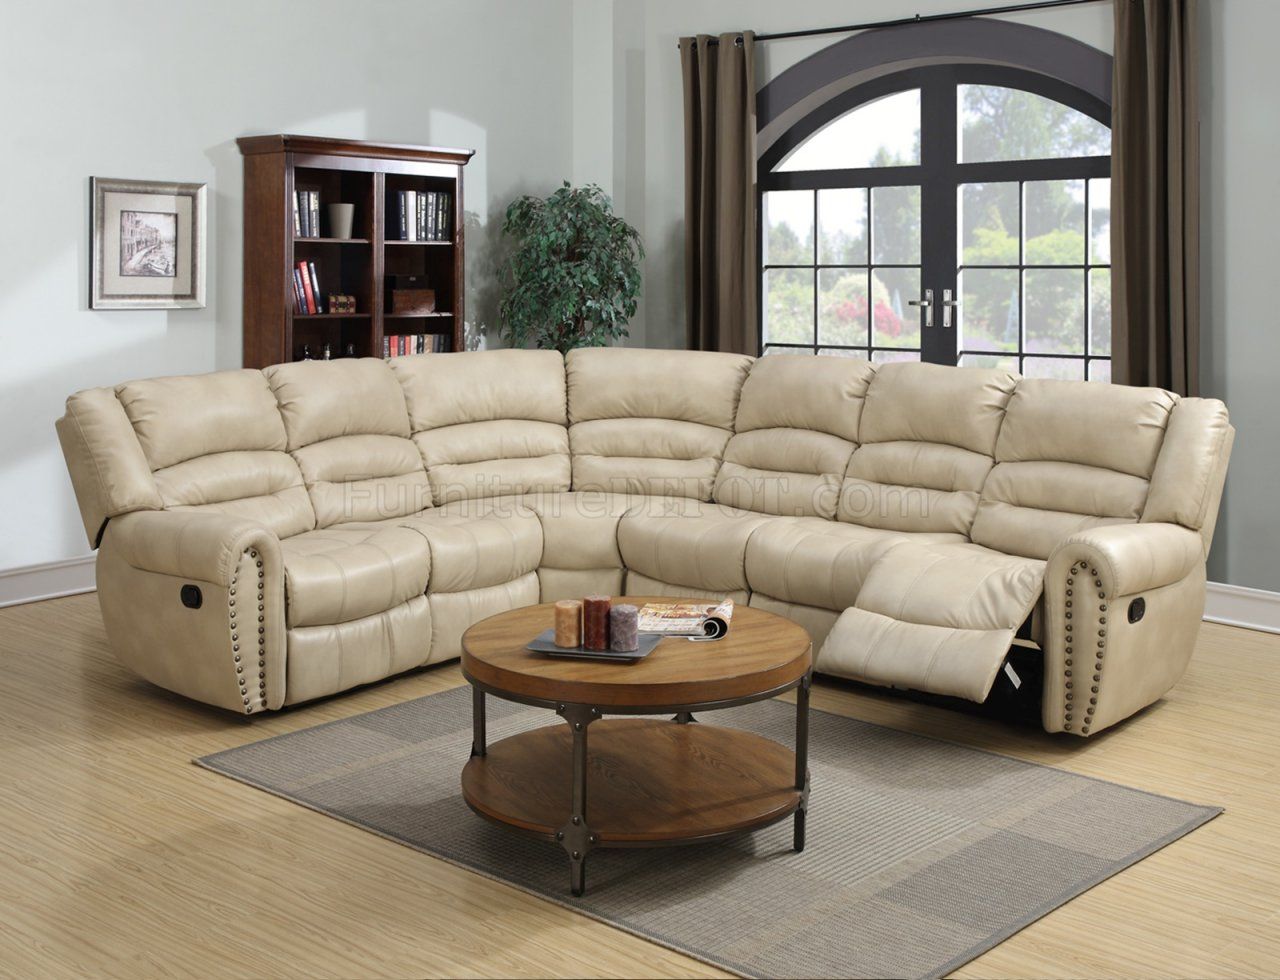 G687 Motion Sectional Sofa In Beige Bonded Leatherglory With Small L Shaped Sectional Sofas In Beige (Gallery 7 of 21)